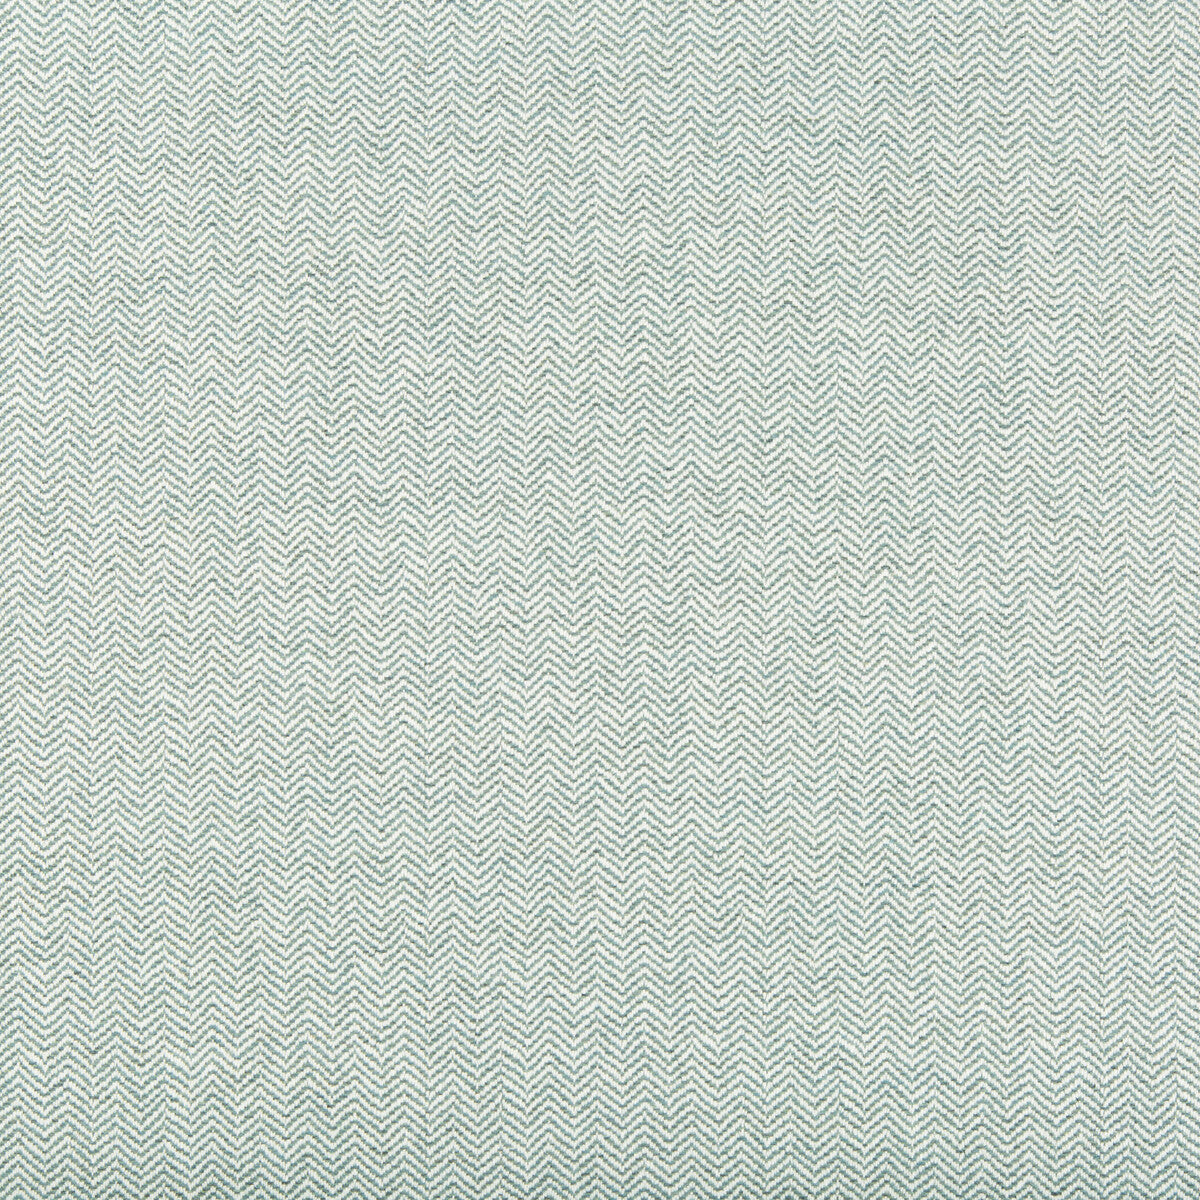 Ukiah fabric in aqua color - pattern 2018110.135.0 - by Lee Jofa in the Gresham Textures collection